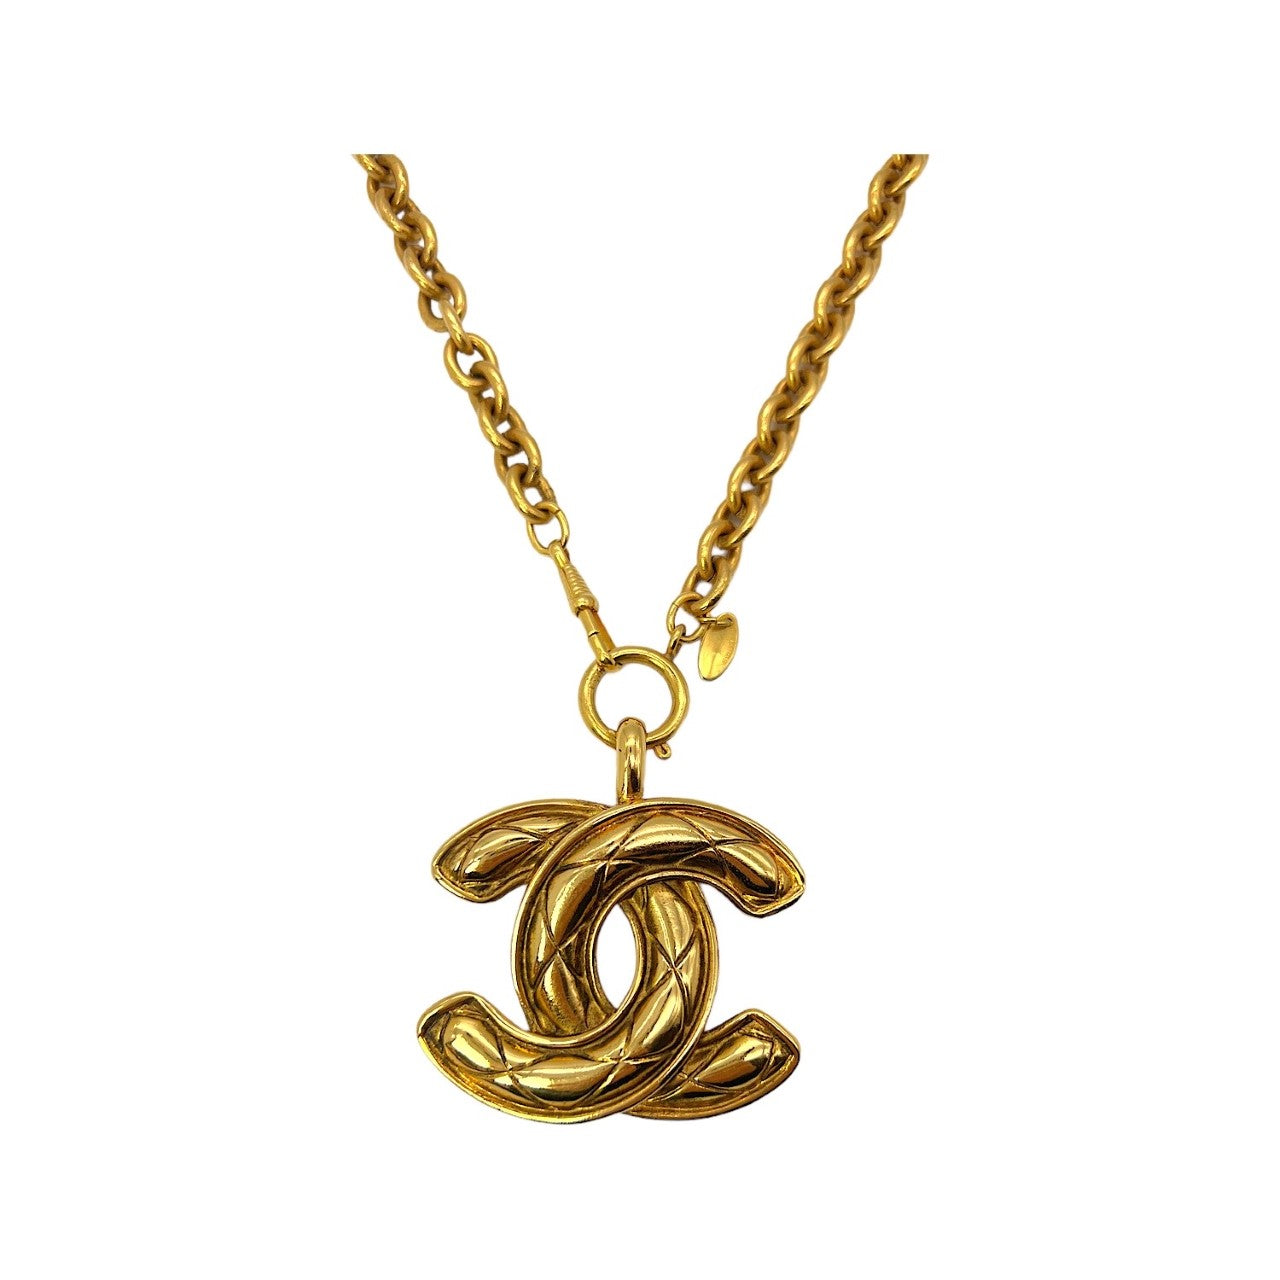 vintage chanel chain necklace